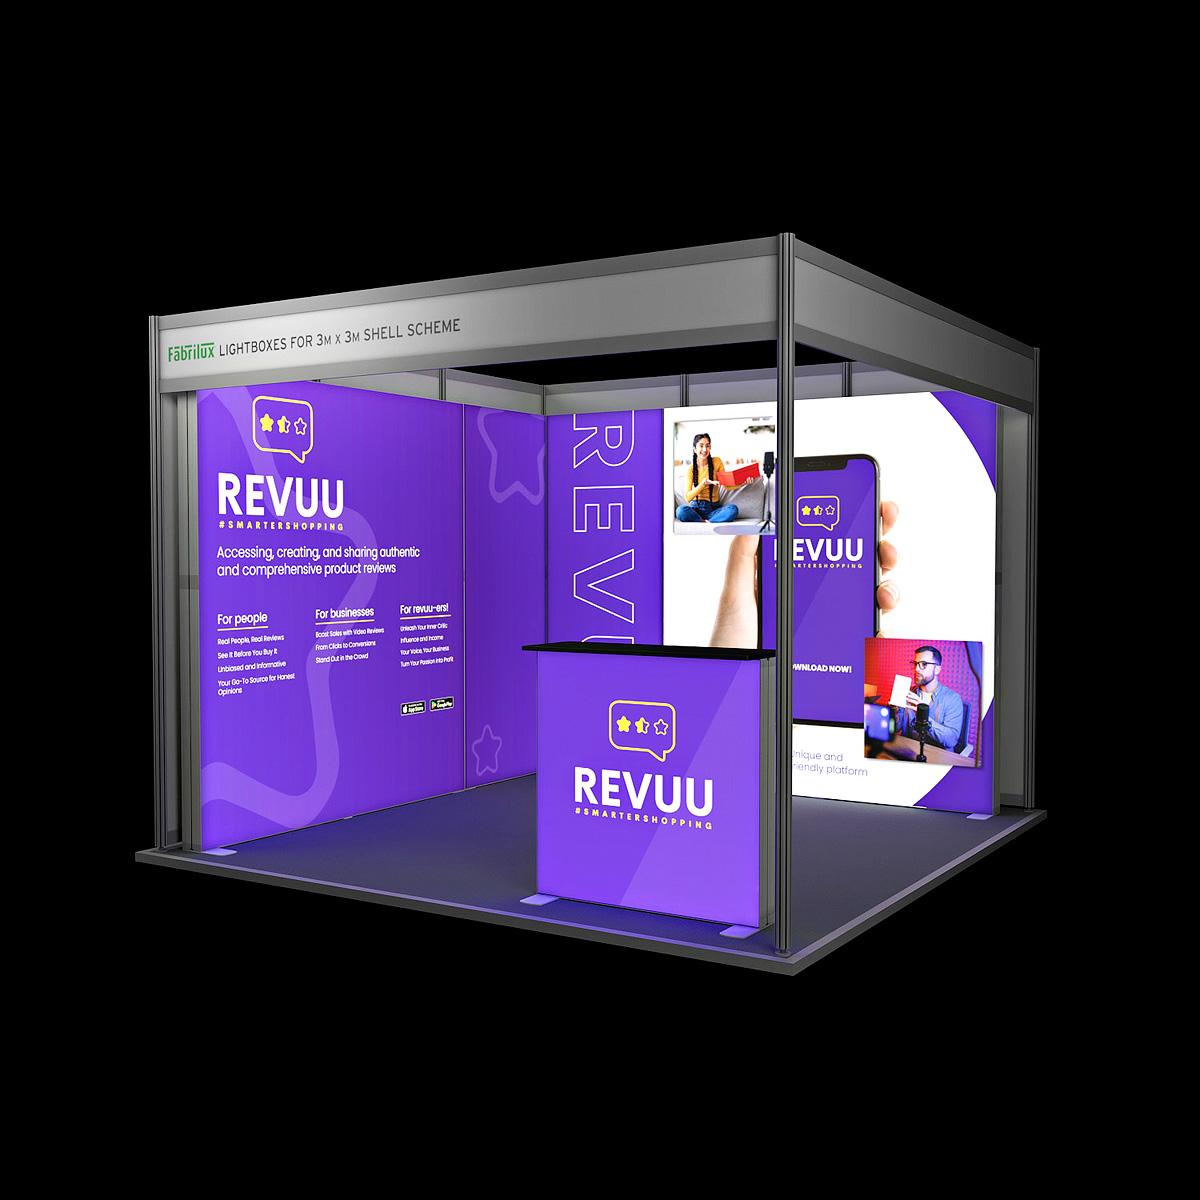 3m x 3m FABRILUX® LED Lightboxes Modular Exhibition Stand Shell Scheme